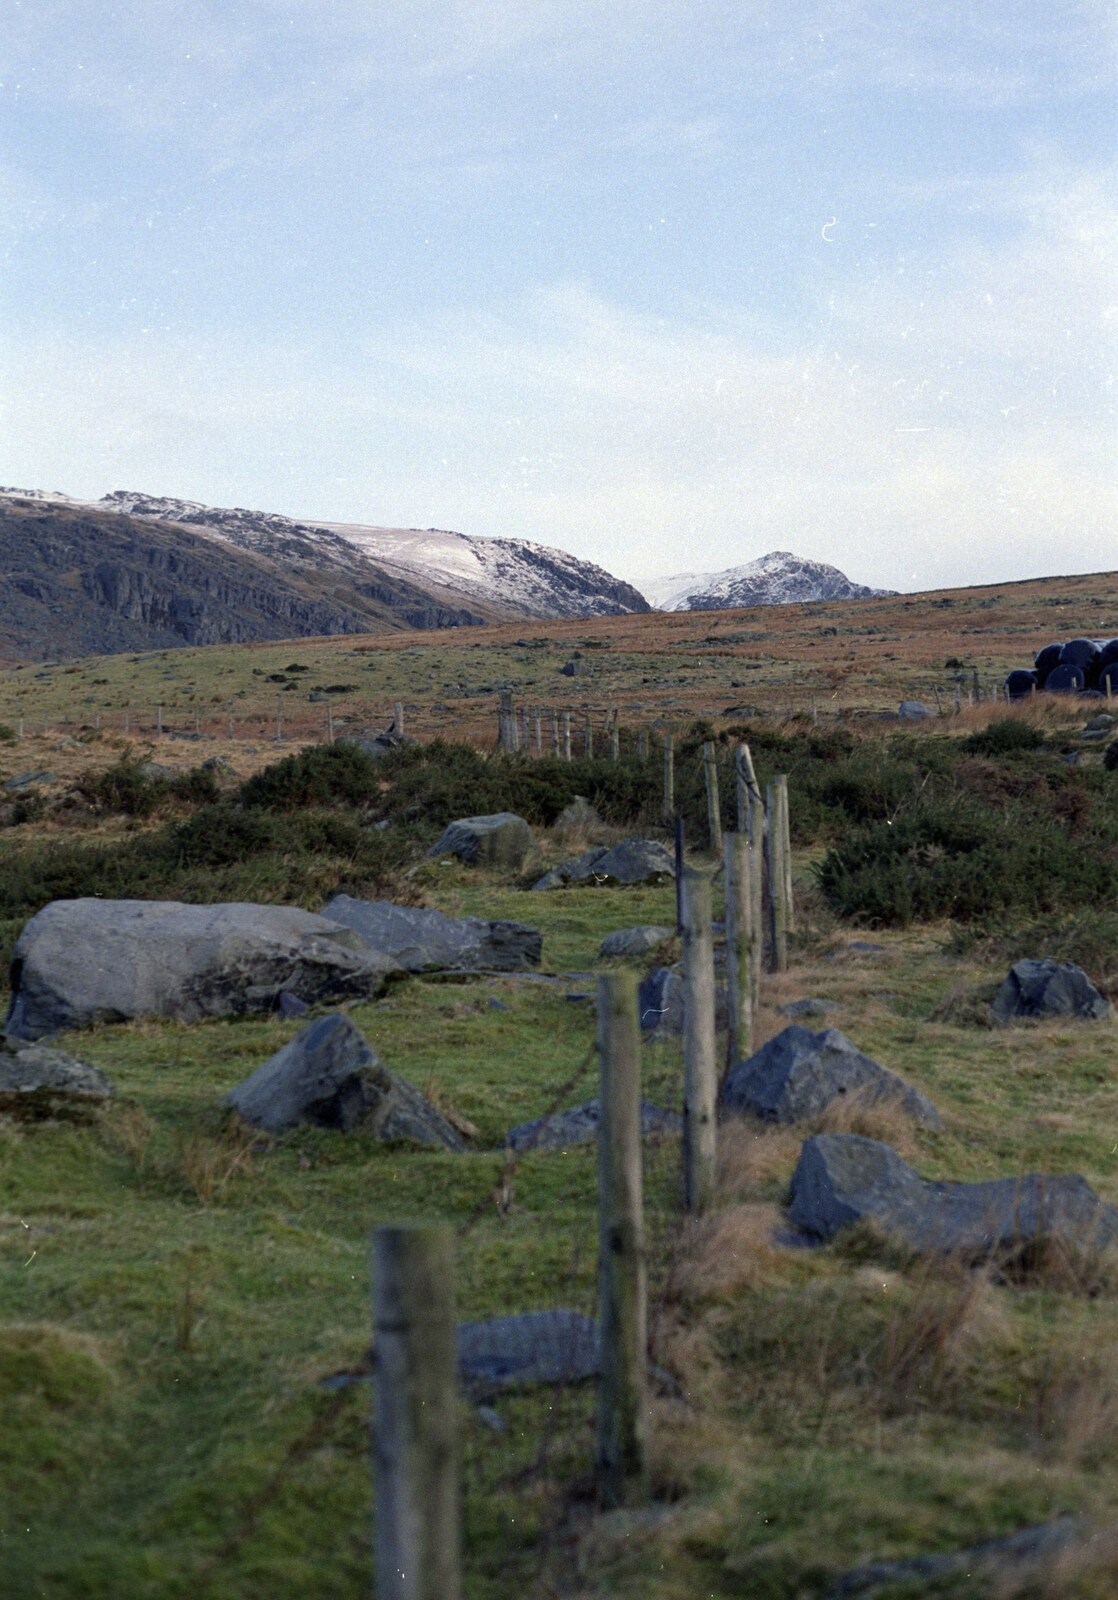 A mountain fence from Capel Curig to Abergavenny: A Road-Trip With Hamish, Wales - 3rd April 1992